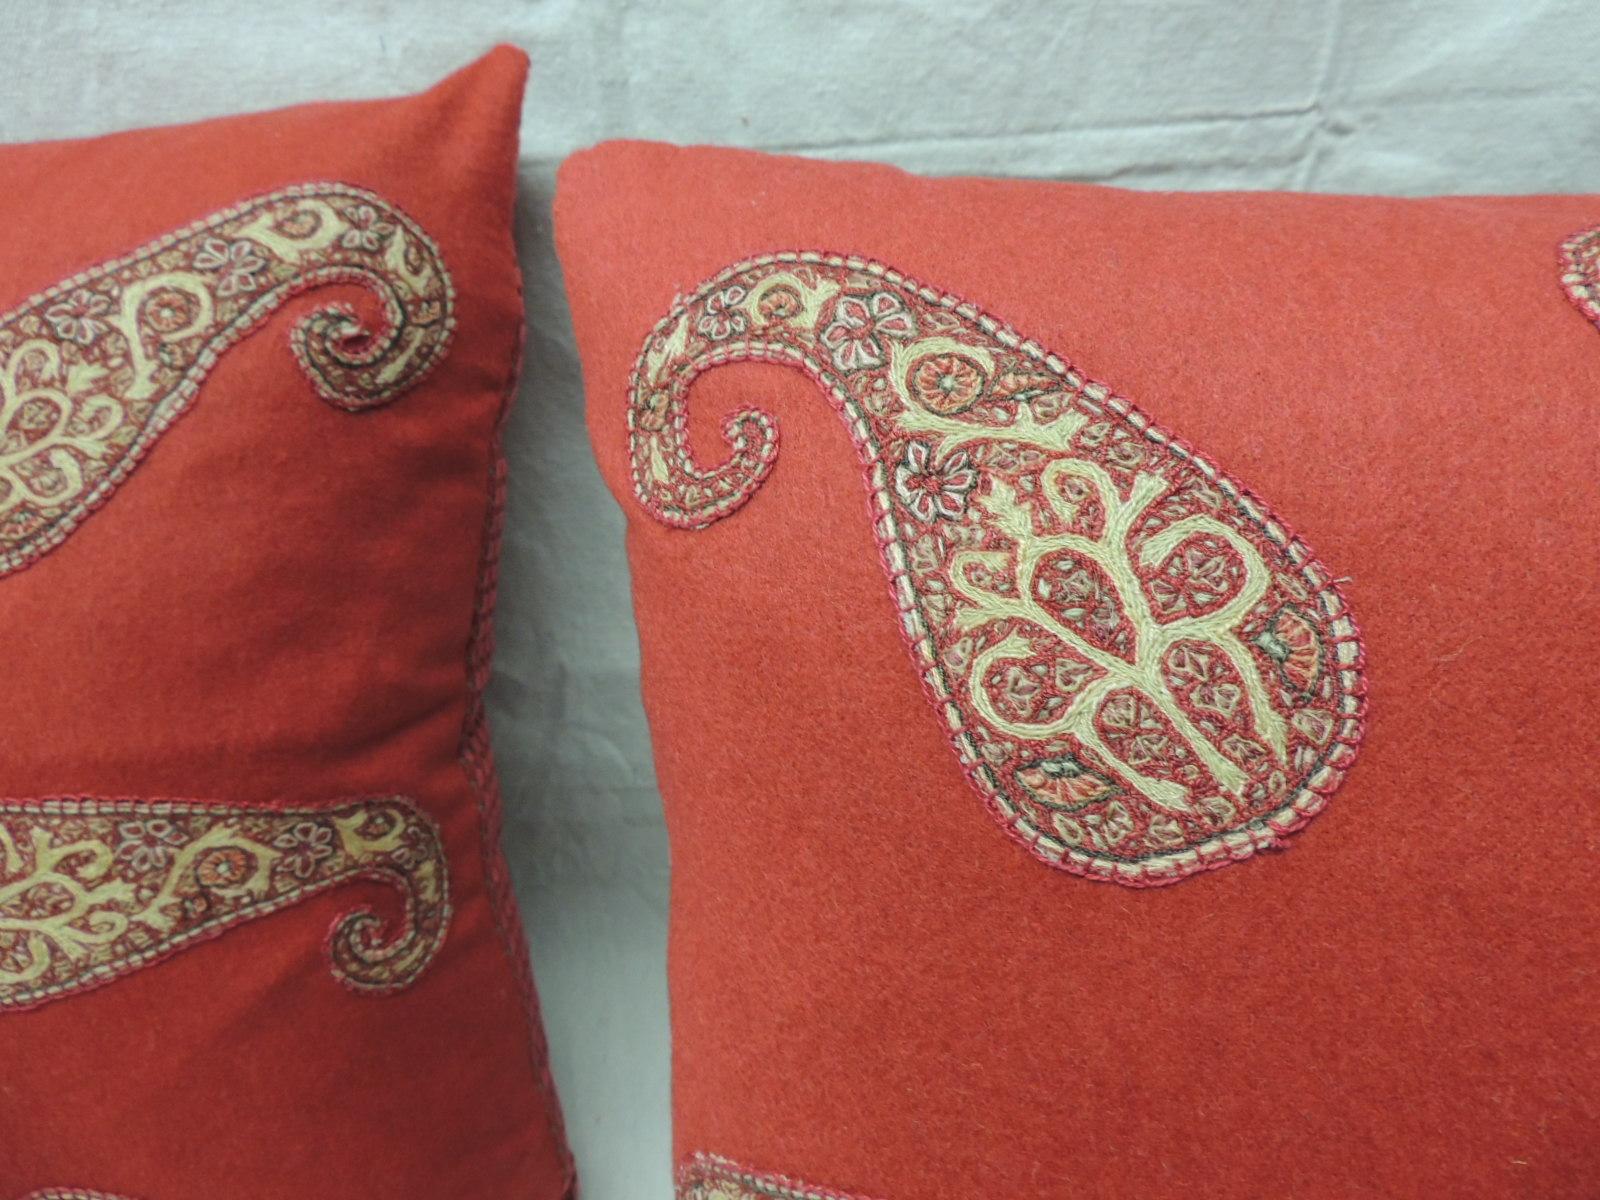 Moorish Red Persian Paisley Hand-Applique Embroidered Paisleys Decorative Pillows For Sale